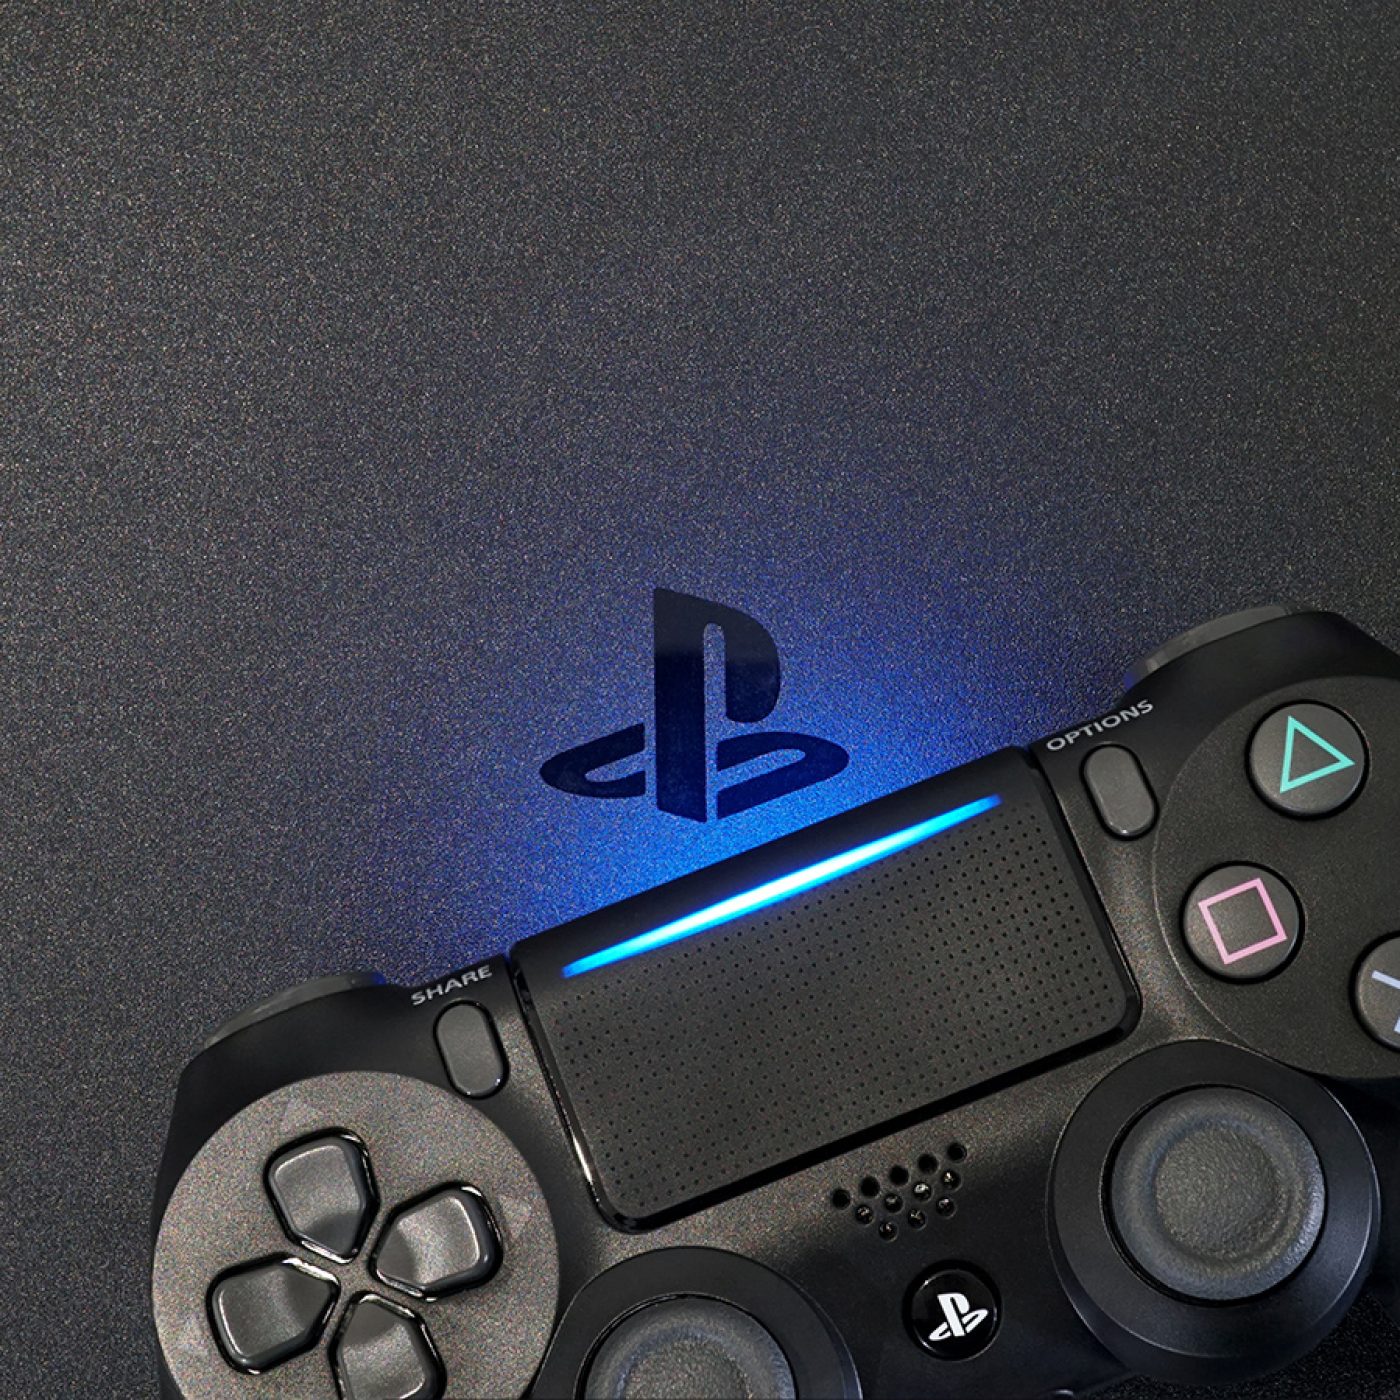 Unconfirmed PS5 Slim: New PlayStation 5 console rumored for upcoming reveal  -  News